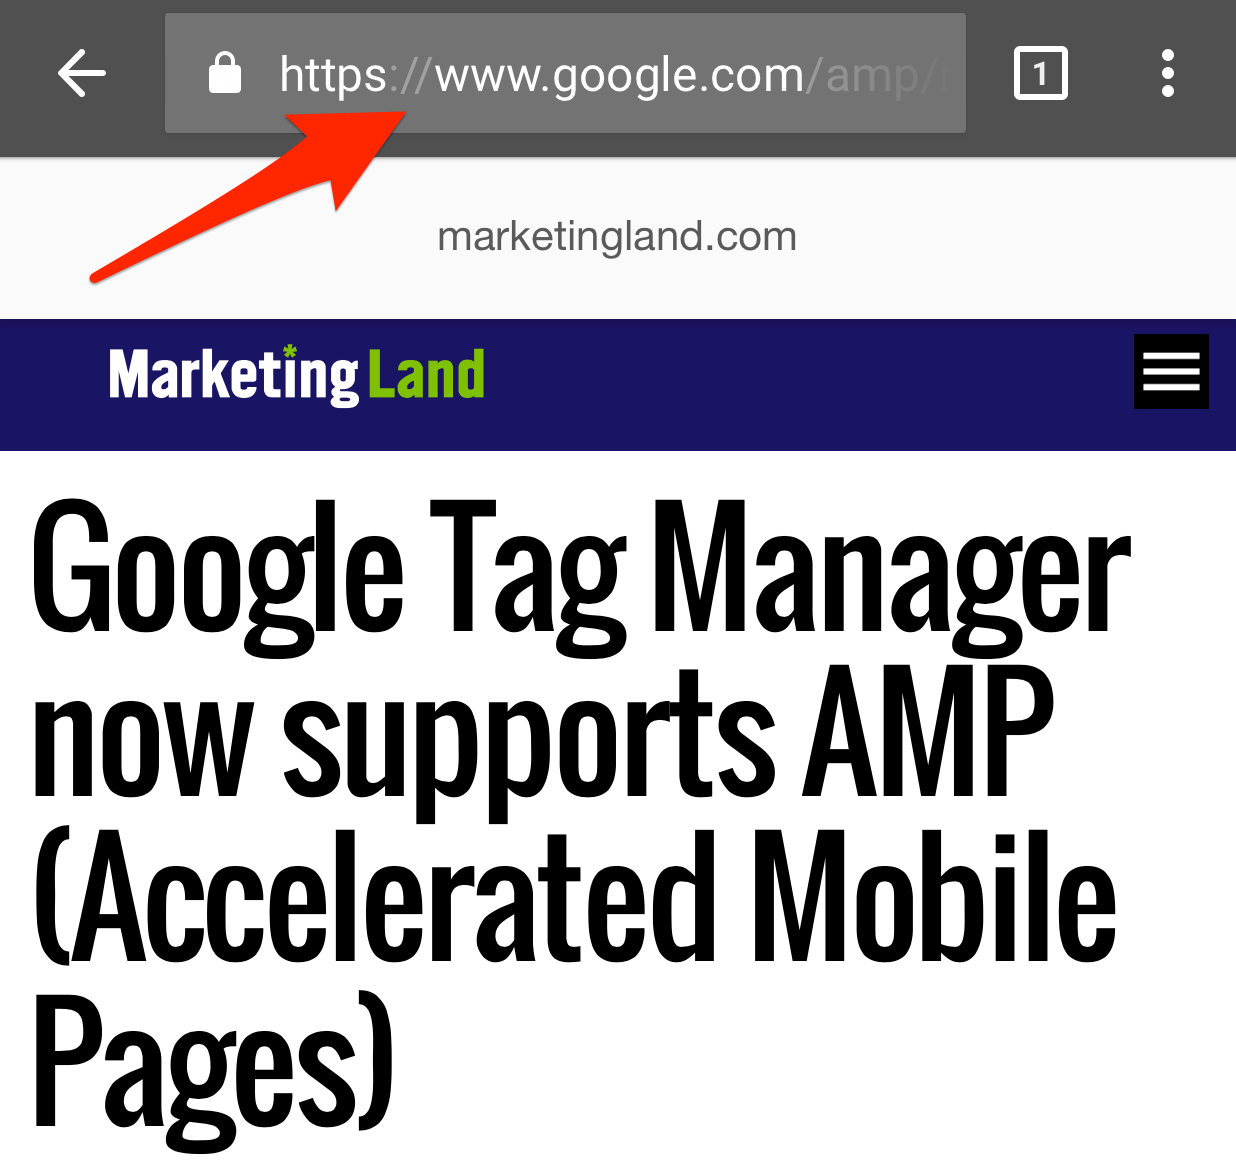 How Google may be slowing down AMP by not using direct links to publishers - google amp urls point at google